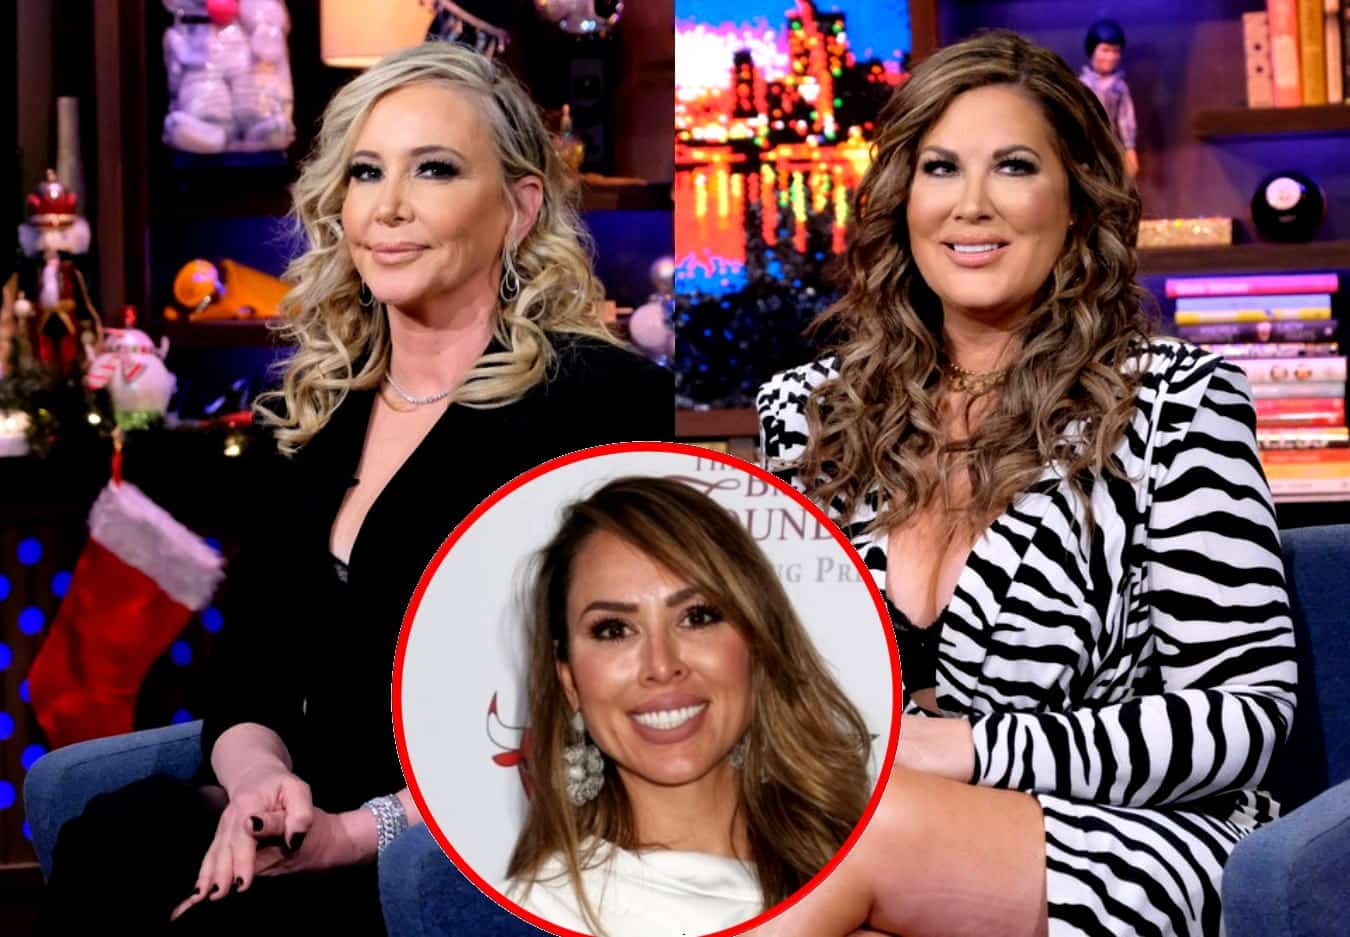 RHOC's Shannon Beador Throws Shade at Emily Simpson's Law Degree, See How Emily's Fighting Back as Kelly Dodd Also Reacts